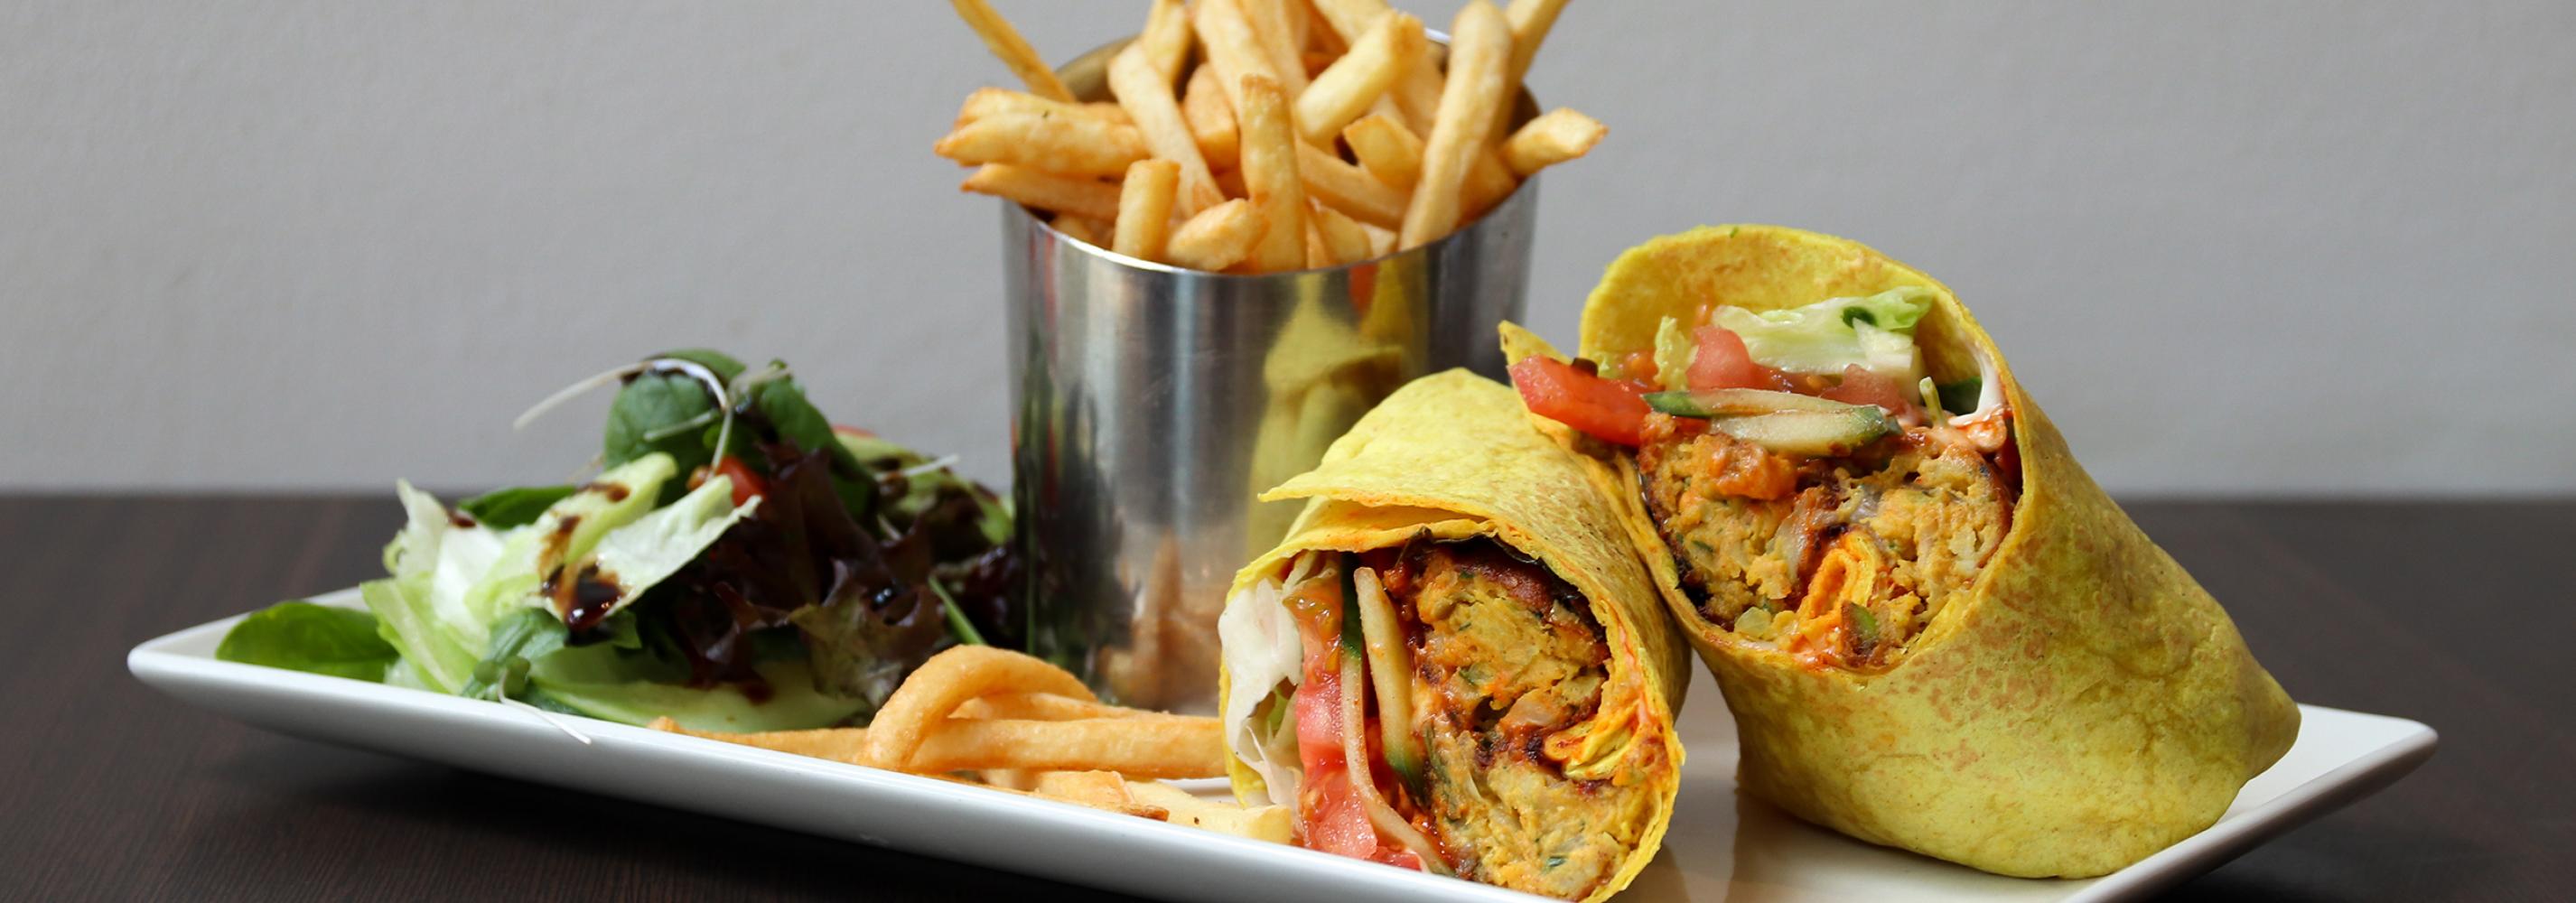 Pakora wrap served in Mungo's (one of 11 catering outlets included in catering plan)